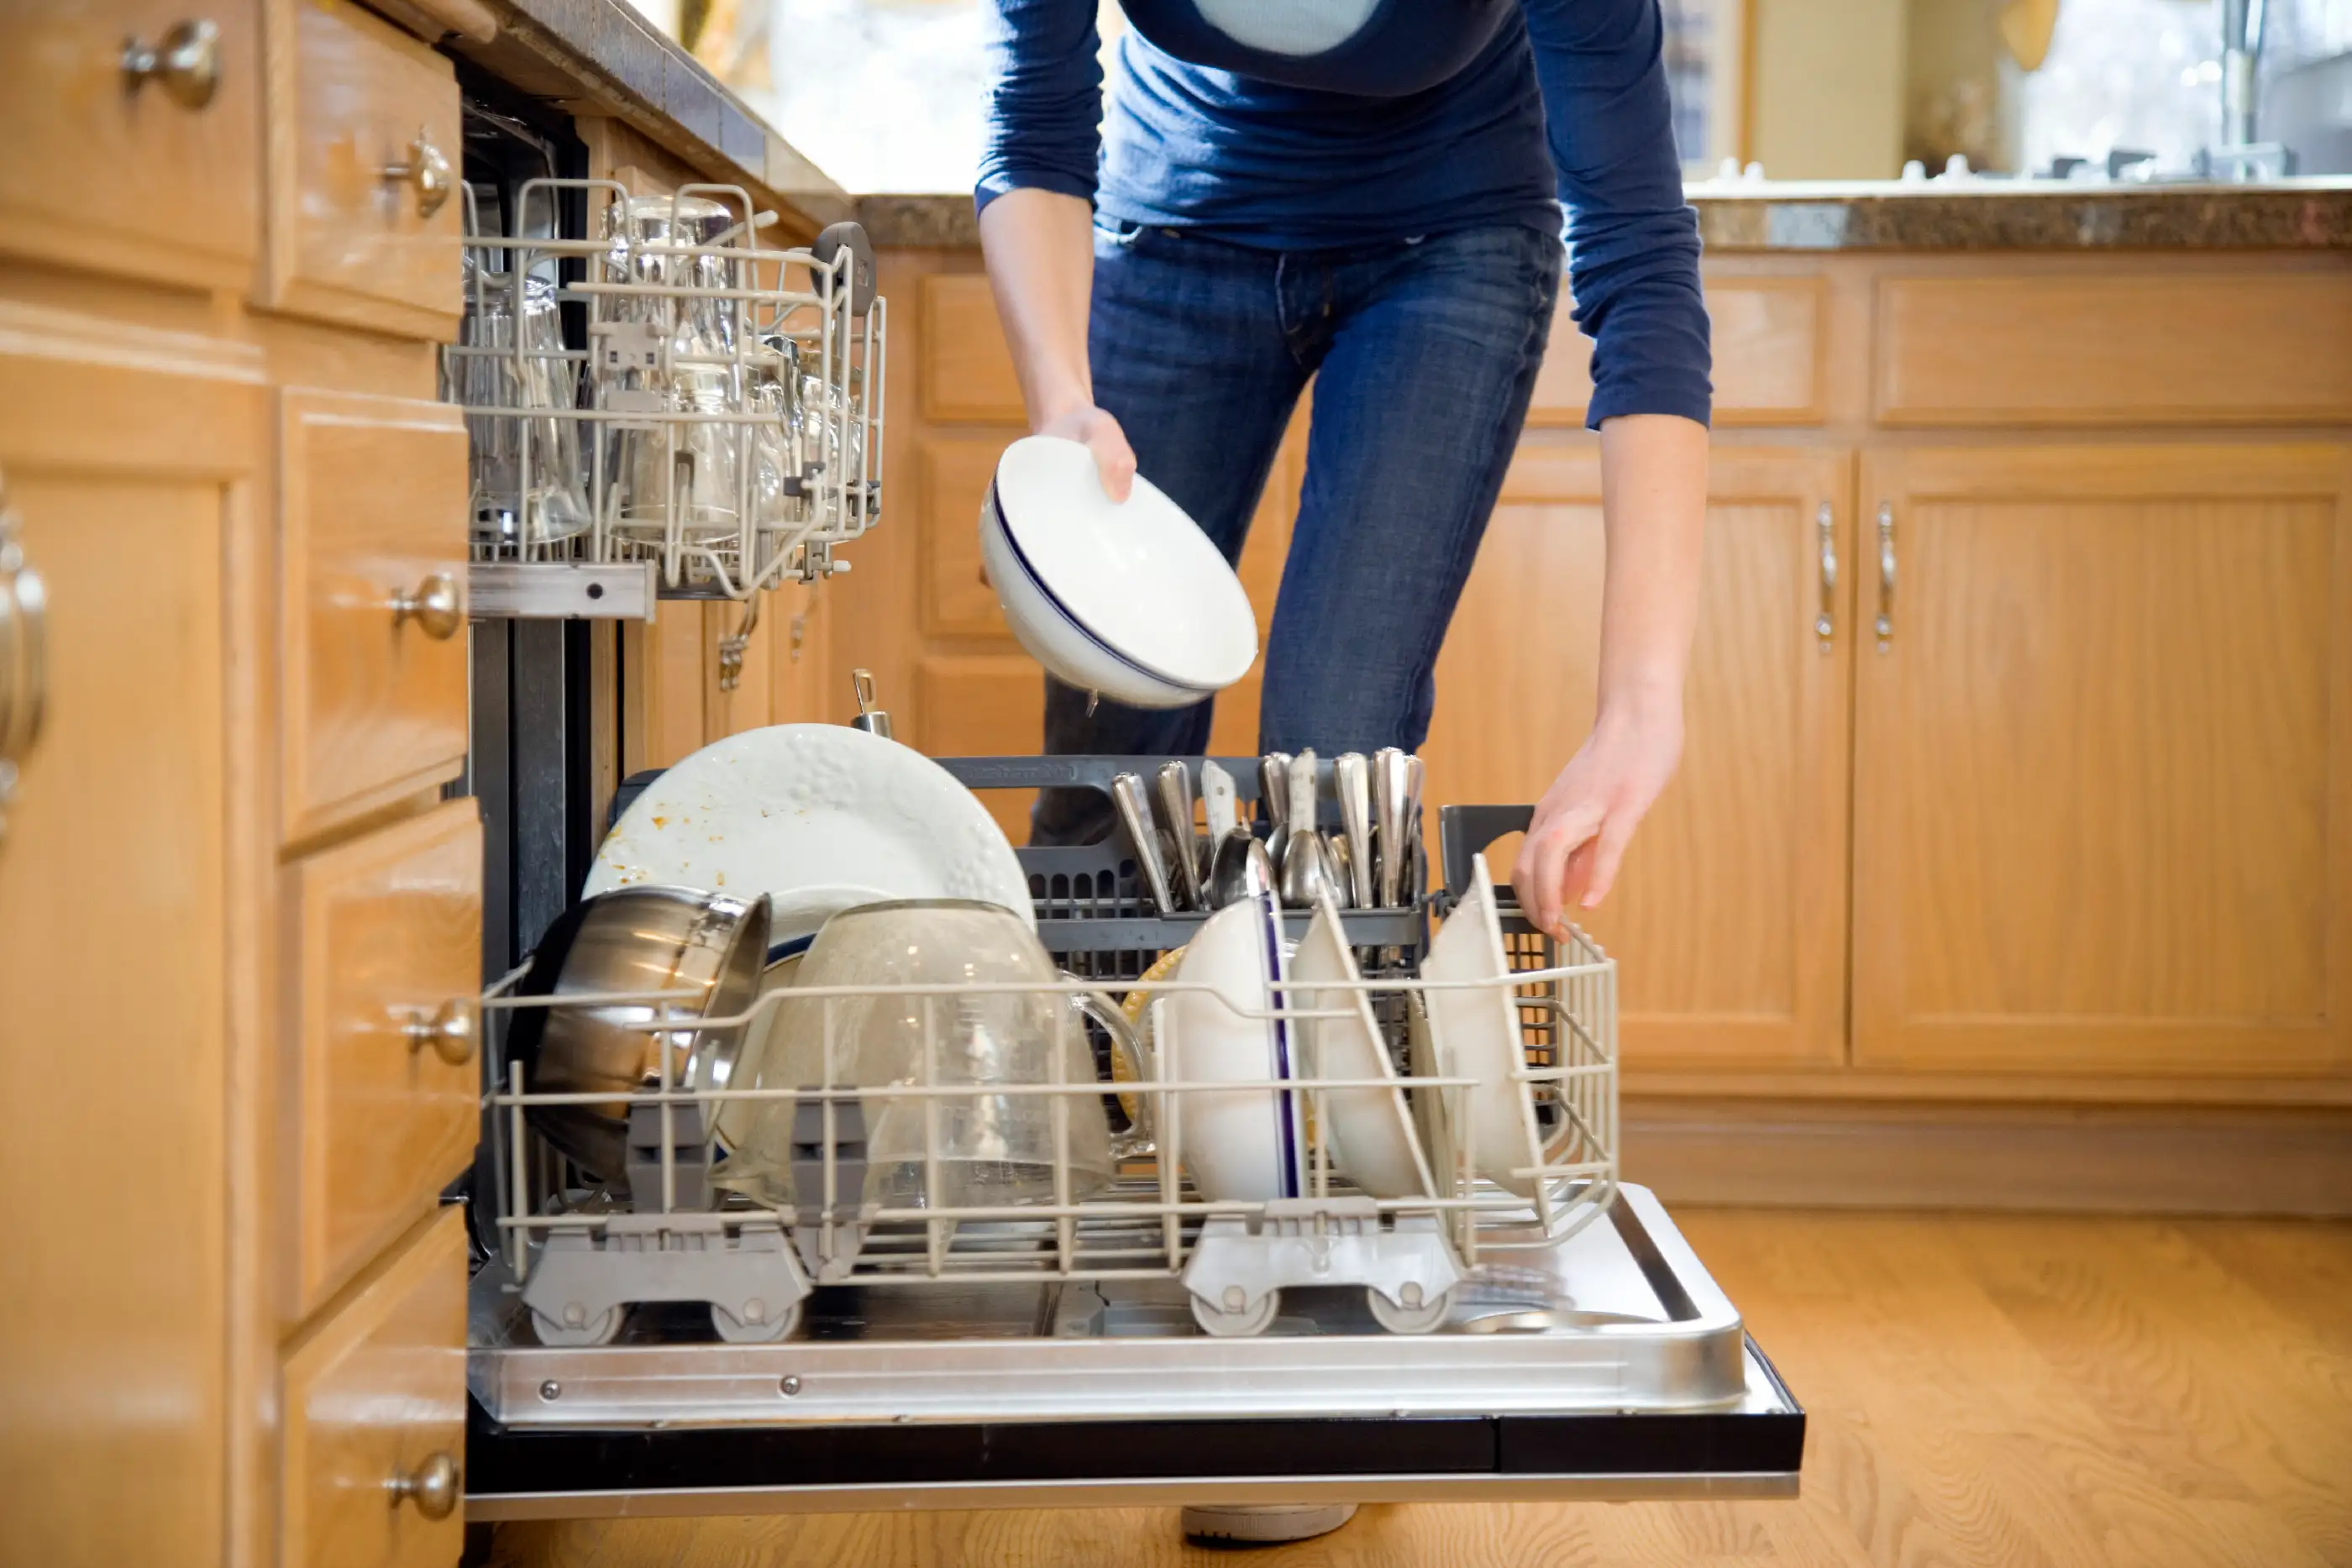 Teenage girl (16-18) putting dishes in dishwasher, low section